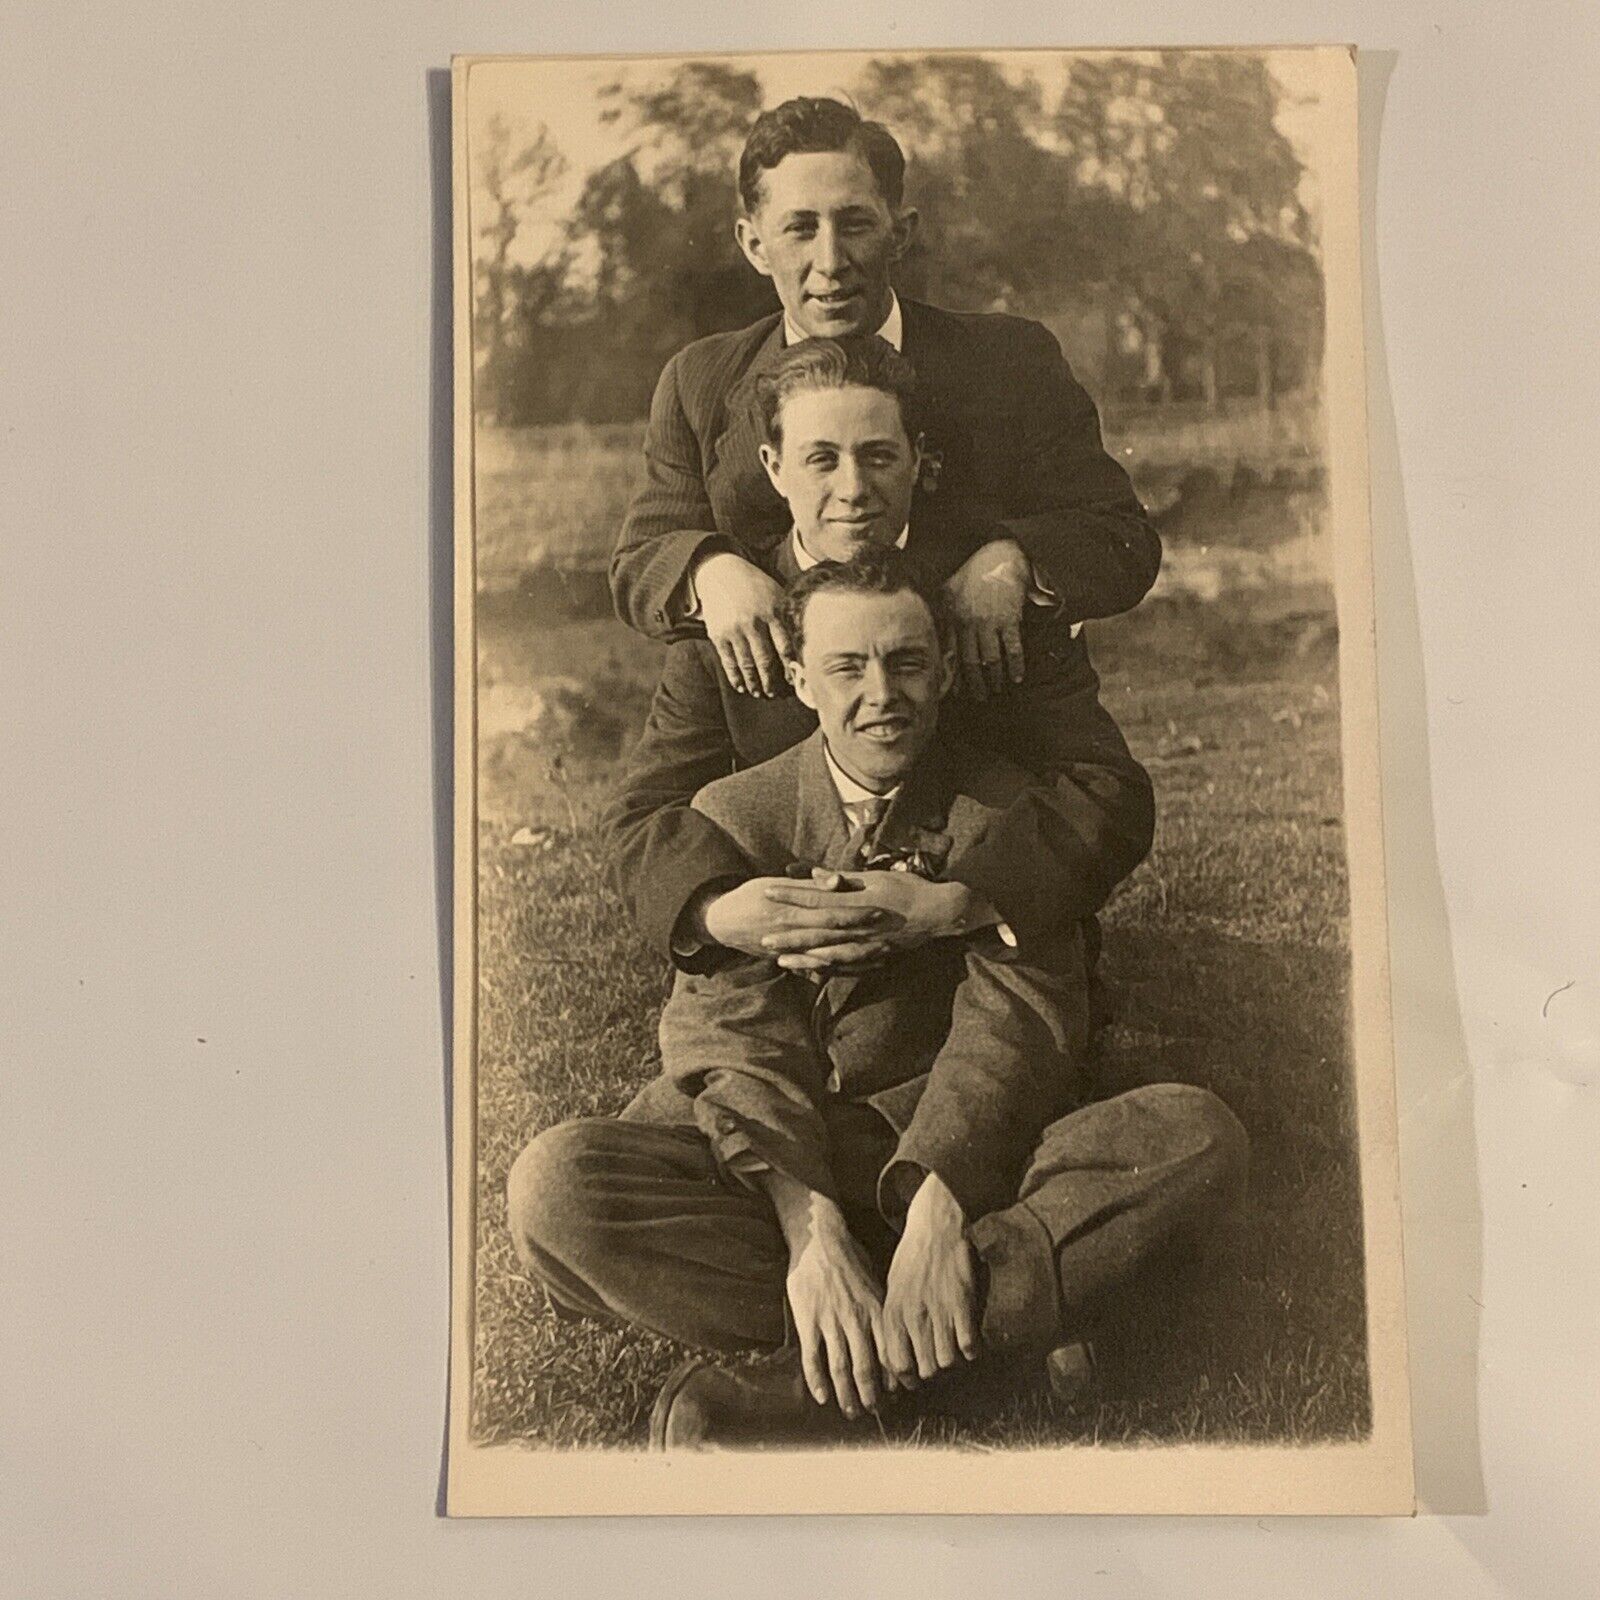 c. 1915 RPPC Handsome Young Men Affectionate Playful Gay Interest Postcard